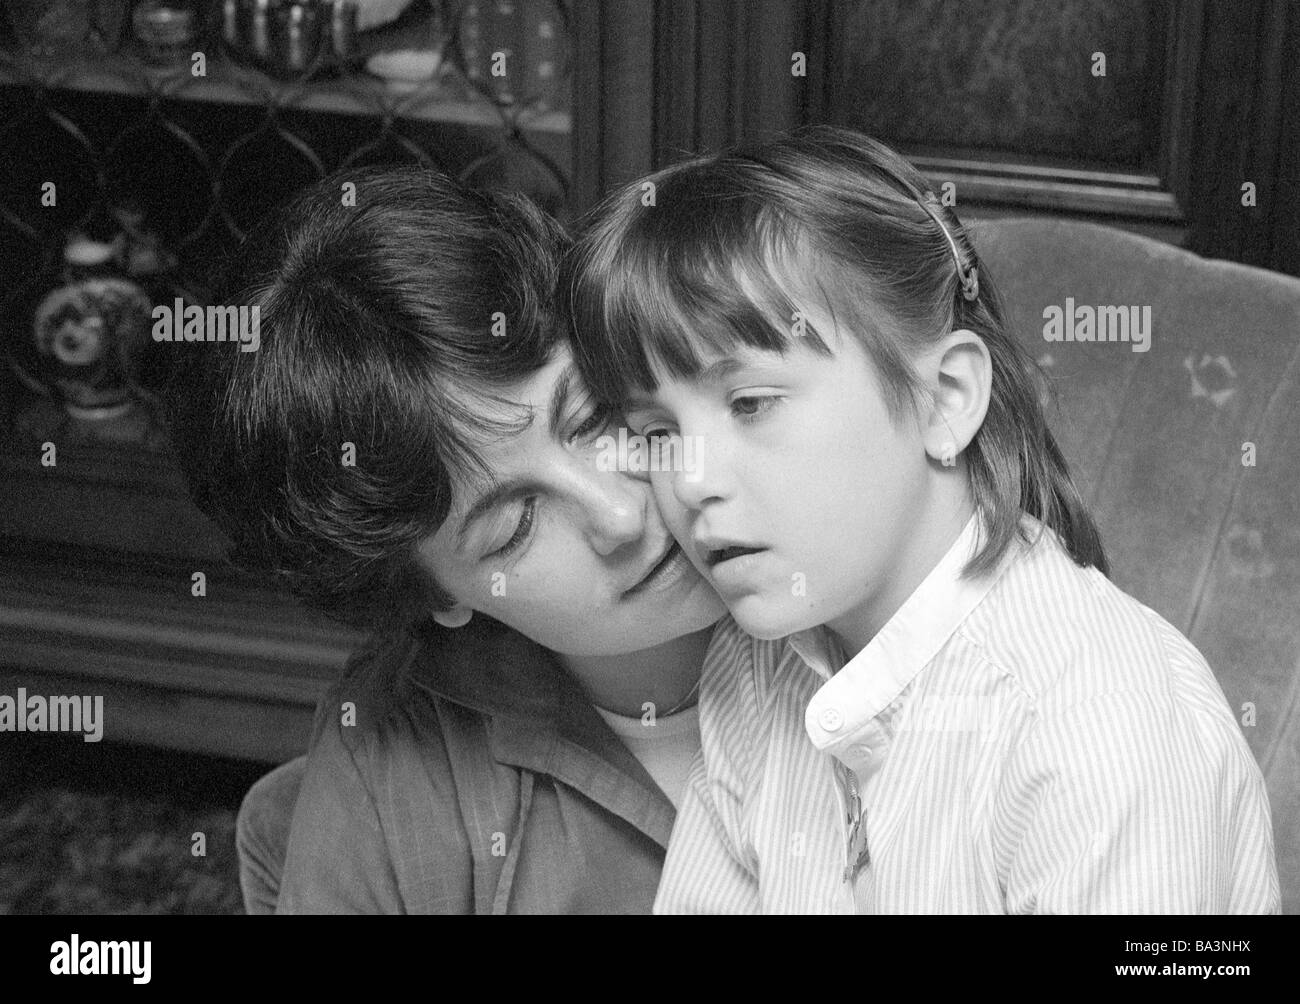 Seventies, black and white photo, people, young woman talking with a child, aged 30 to 40 years, girl, aged 10 to 12 years, Doris, Andrea Stock Photo